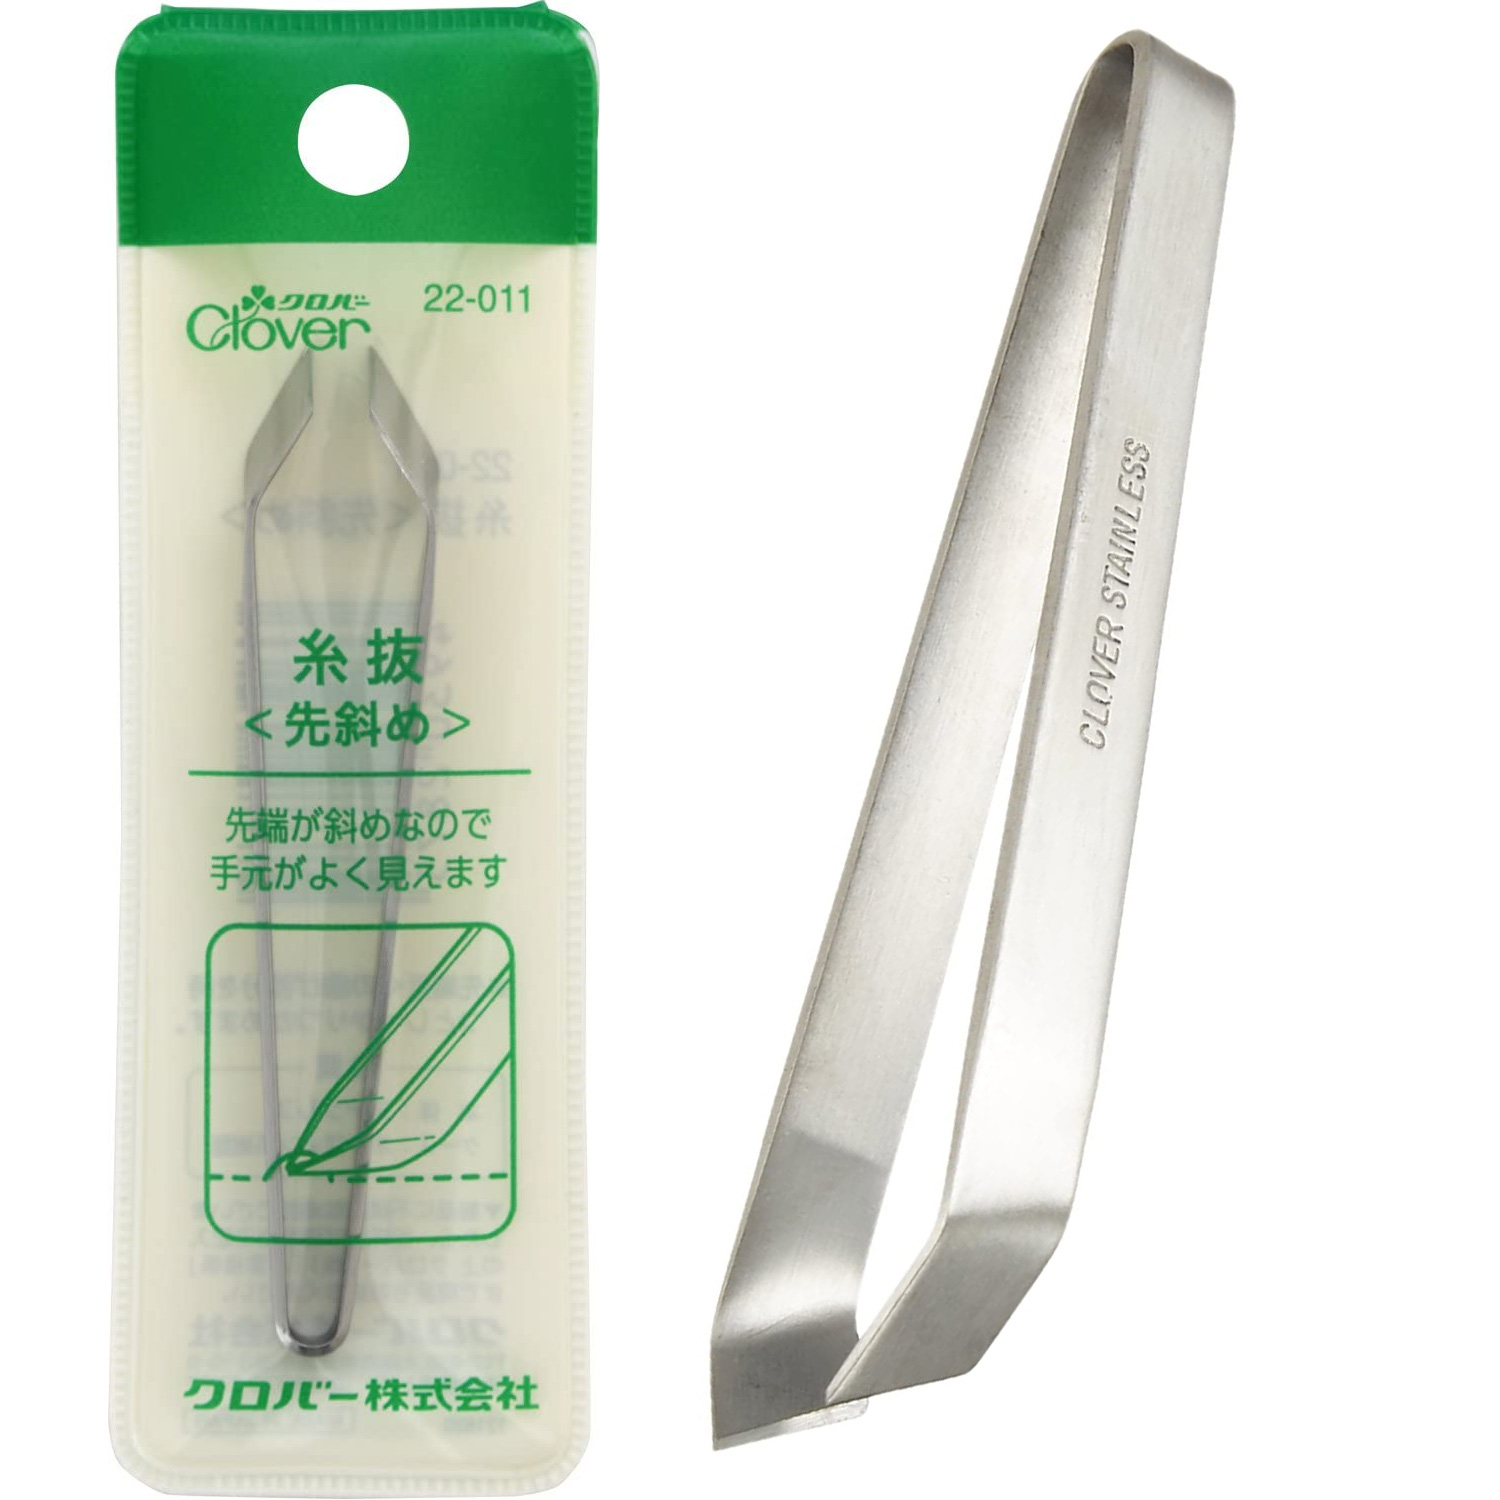 CL22-011 Clover Home Thread Puller/Tweezer small (pcs) / NIPPON CHUKO ONLINE